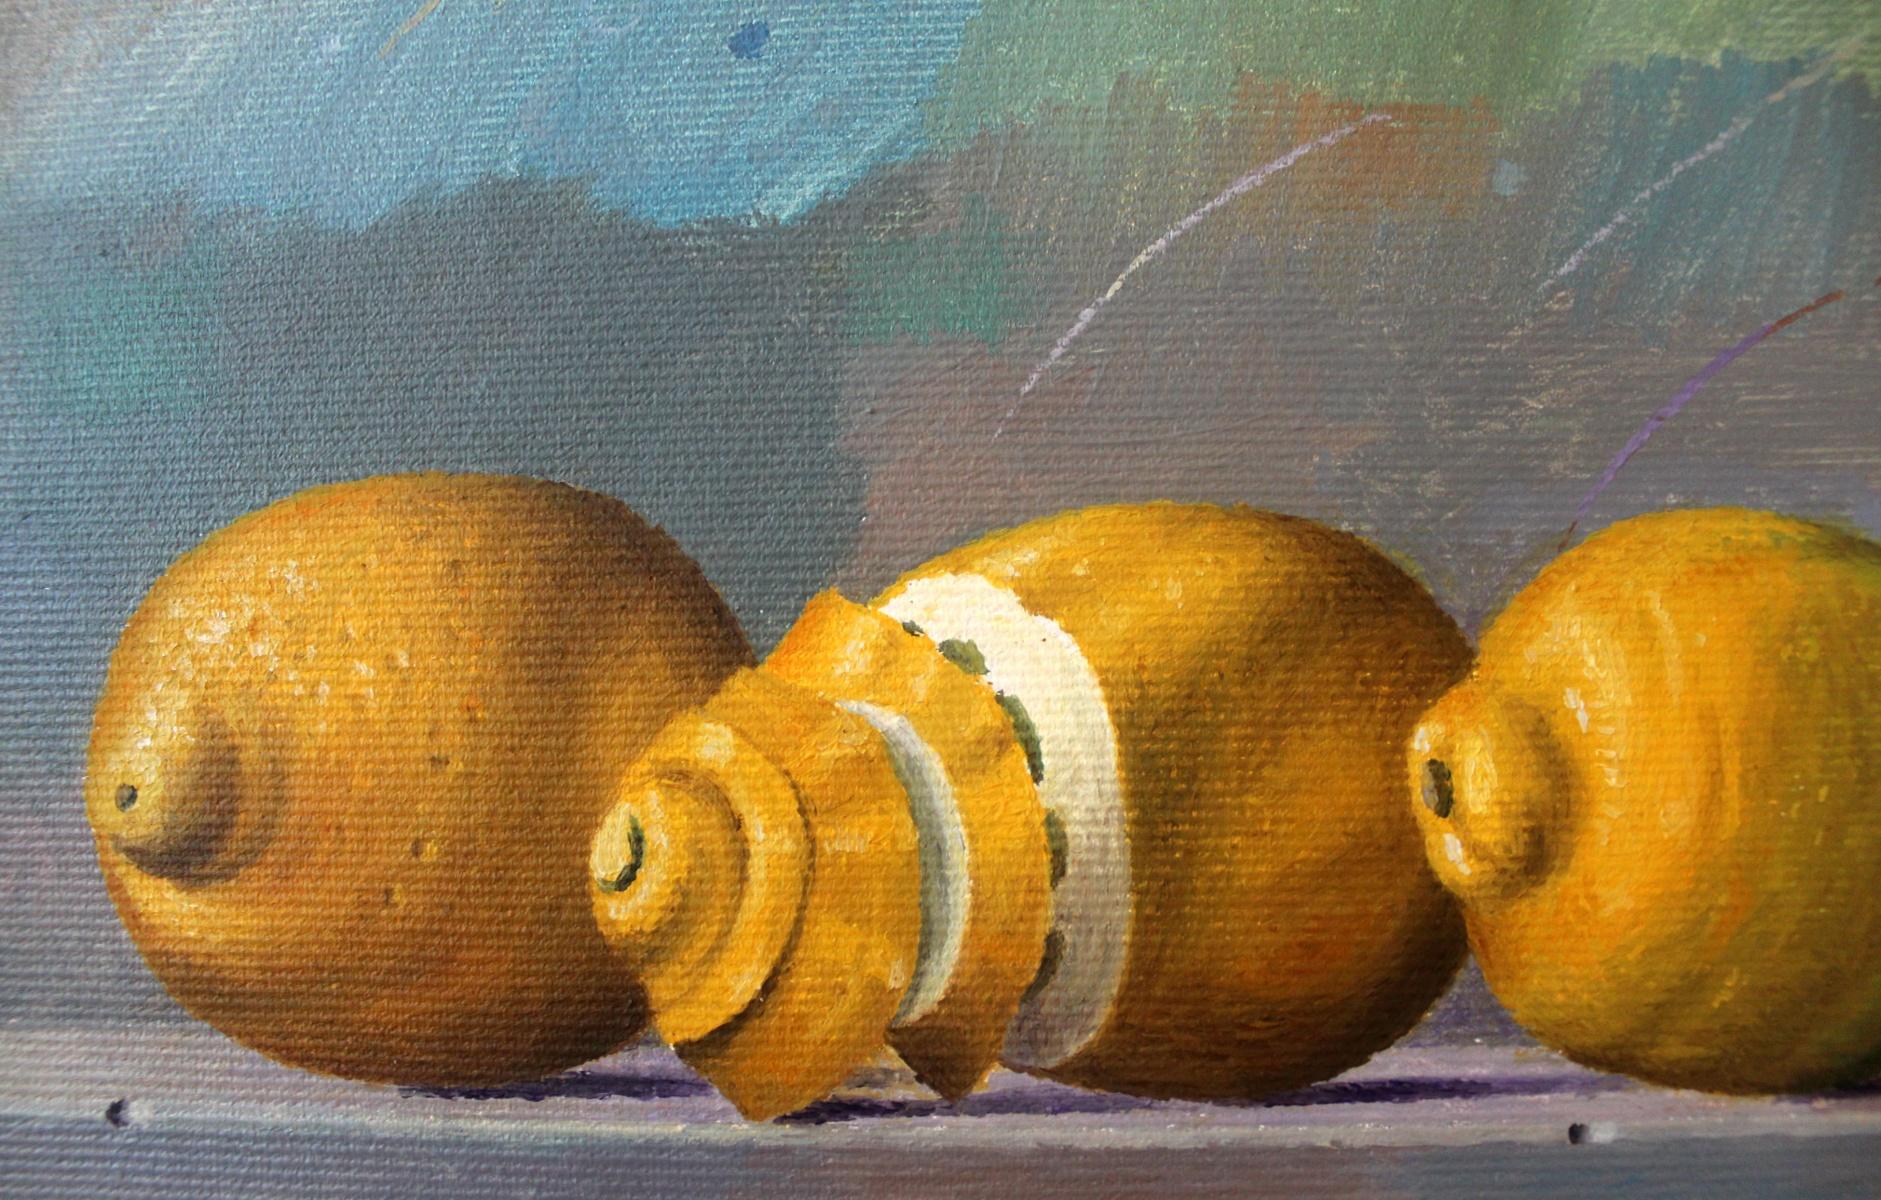 Lemons - Contemporary Figurative Oil Painting, Realistic, Fruits, Still life - Gray Figurative Painting by Zbigniew Wozniak